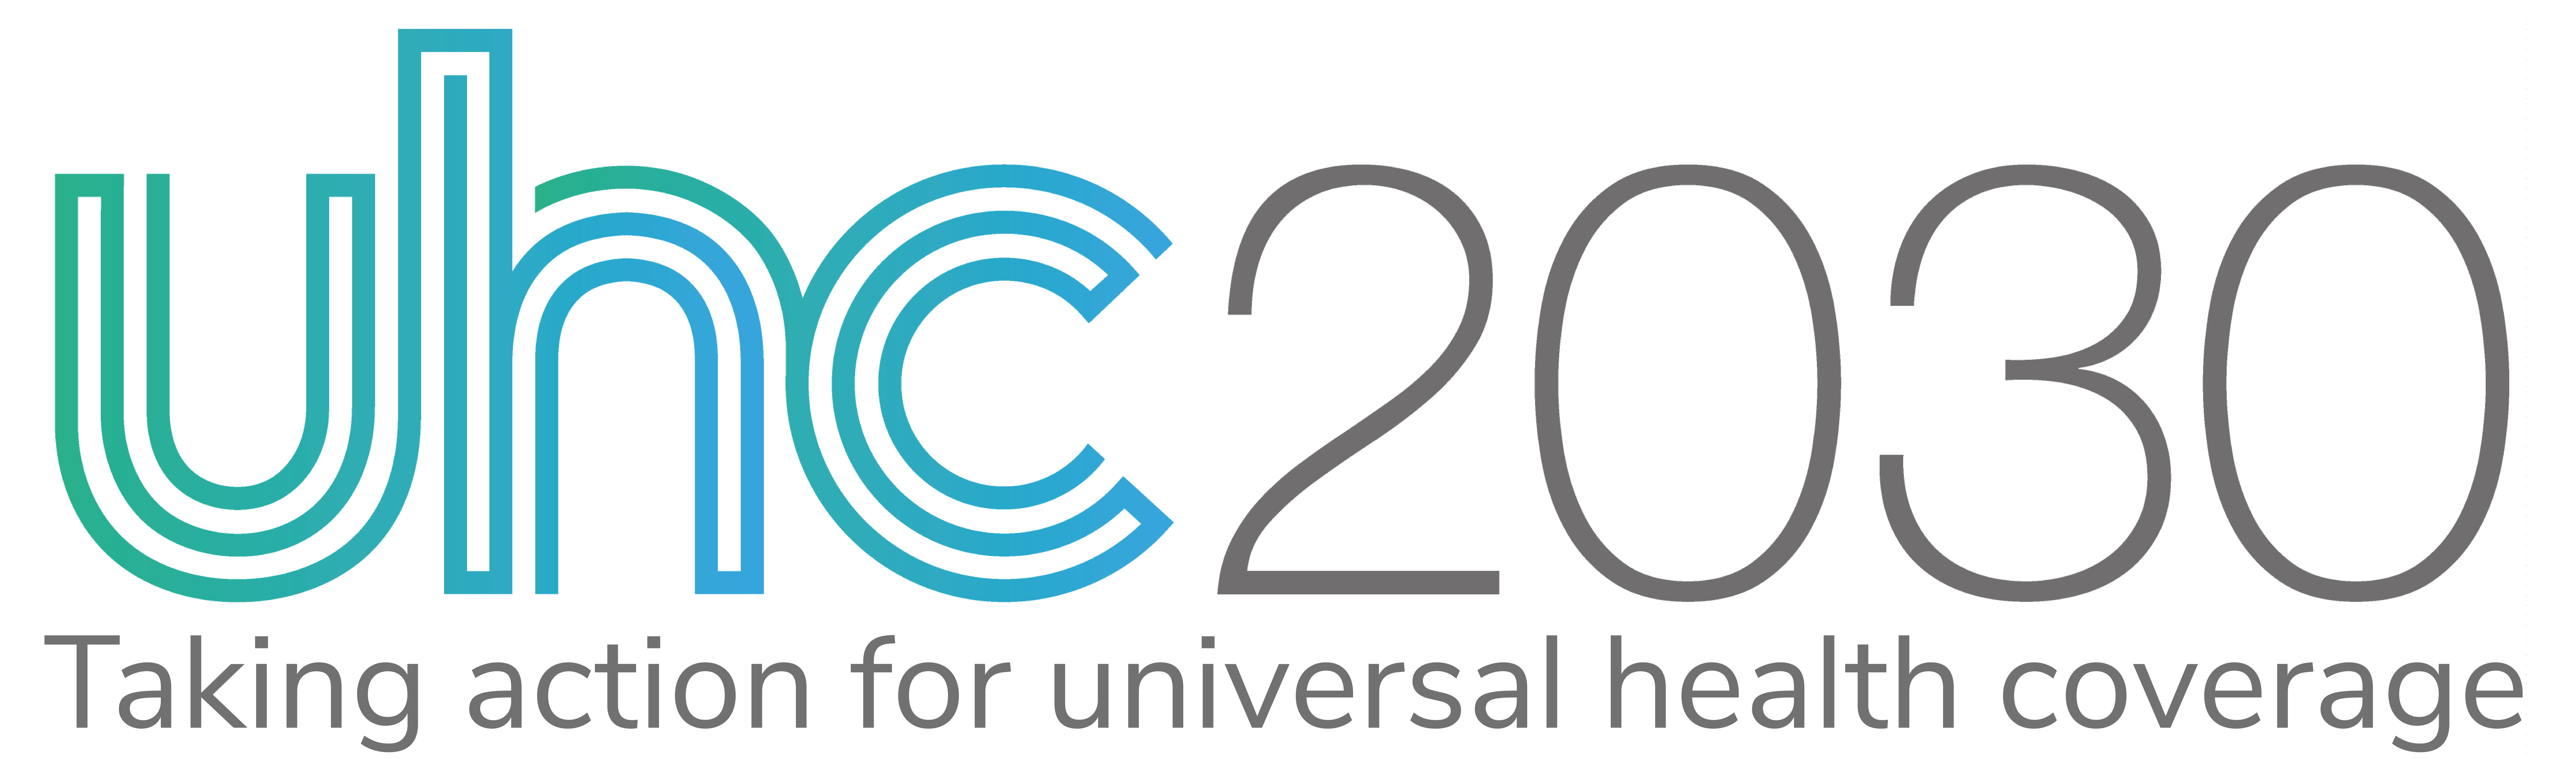 Announcement: UHC2030 is seeking applications for new Co-chairs